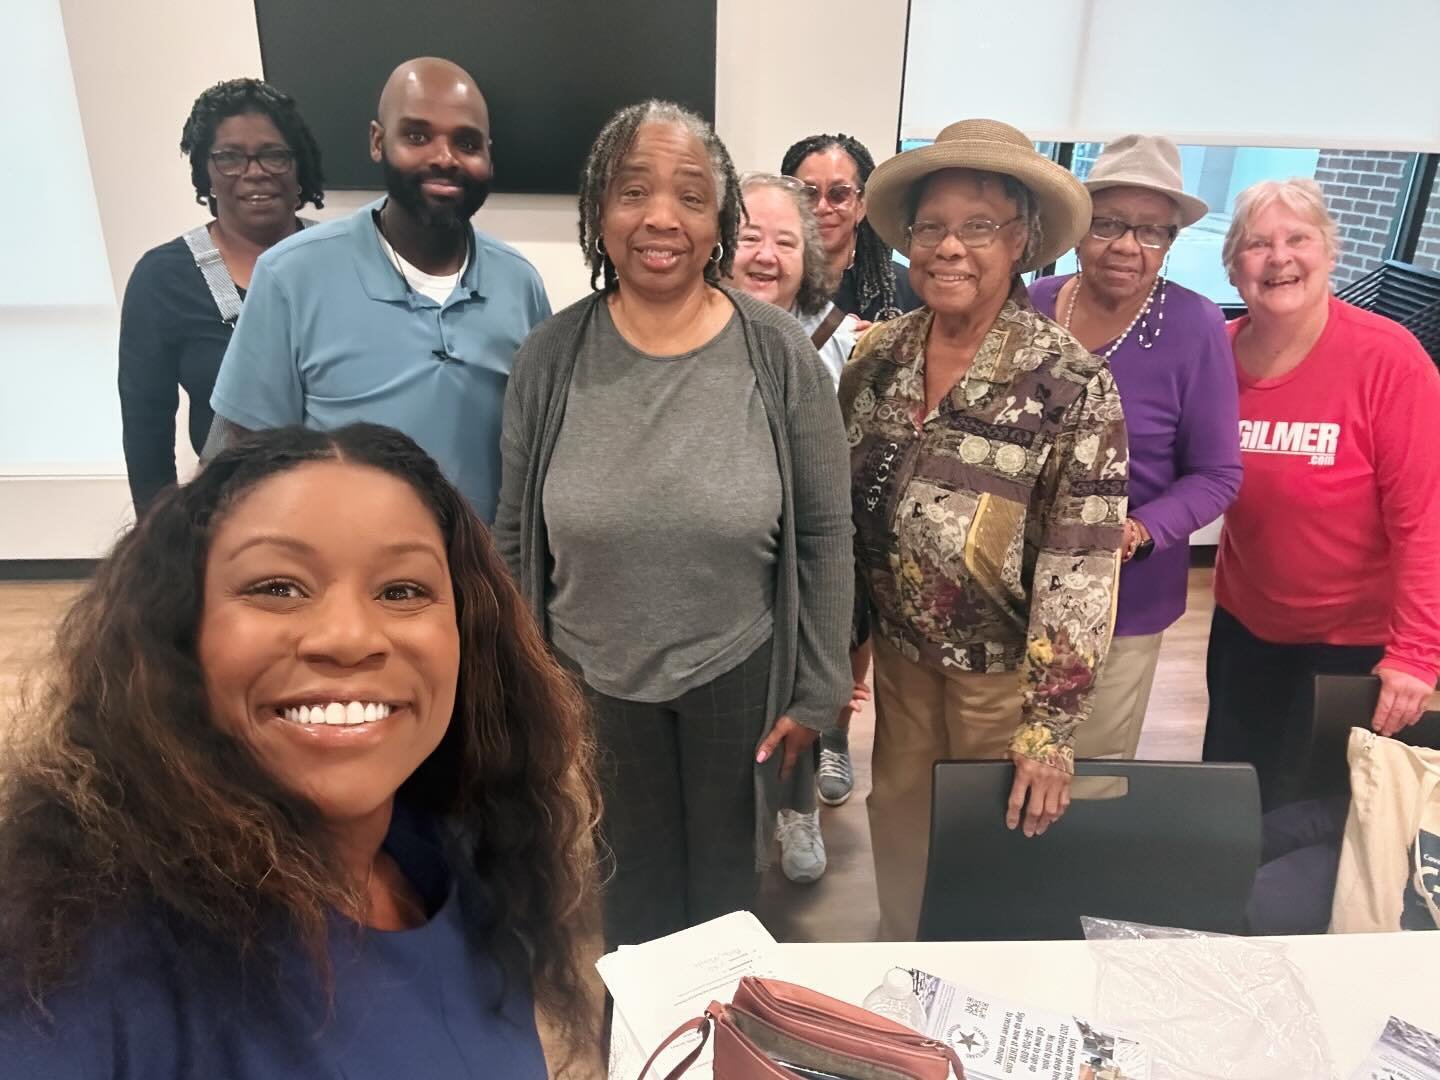 &ldquo;Grateful for the opportunity to speak at the Upshur County Democratic Party meeting!  It&rsquo;s always a pleasure connecting with new faces and sharing my journey and platform. Despite our different districts, East Texans remain united! Let&r